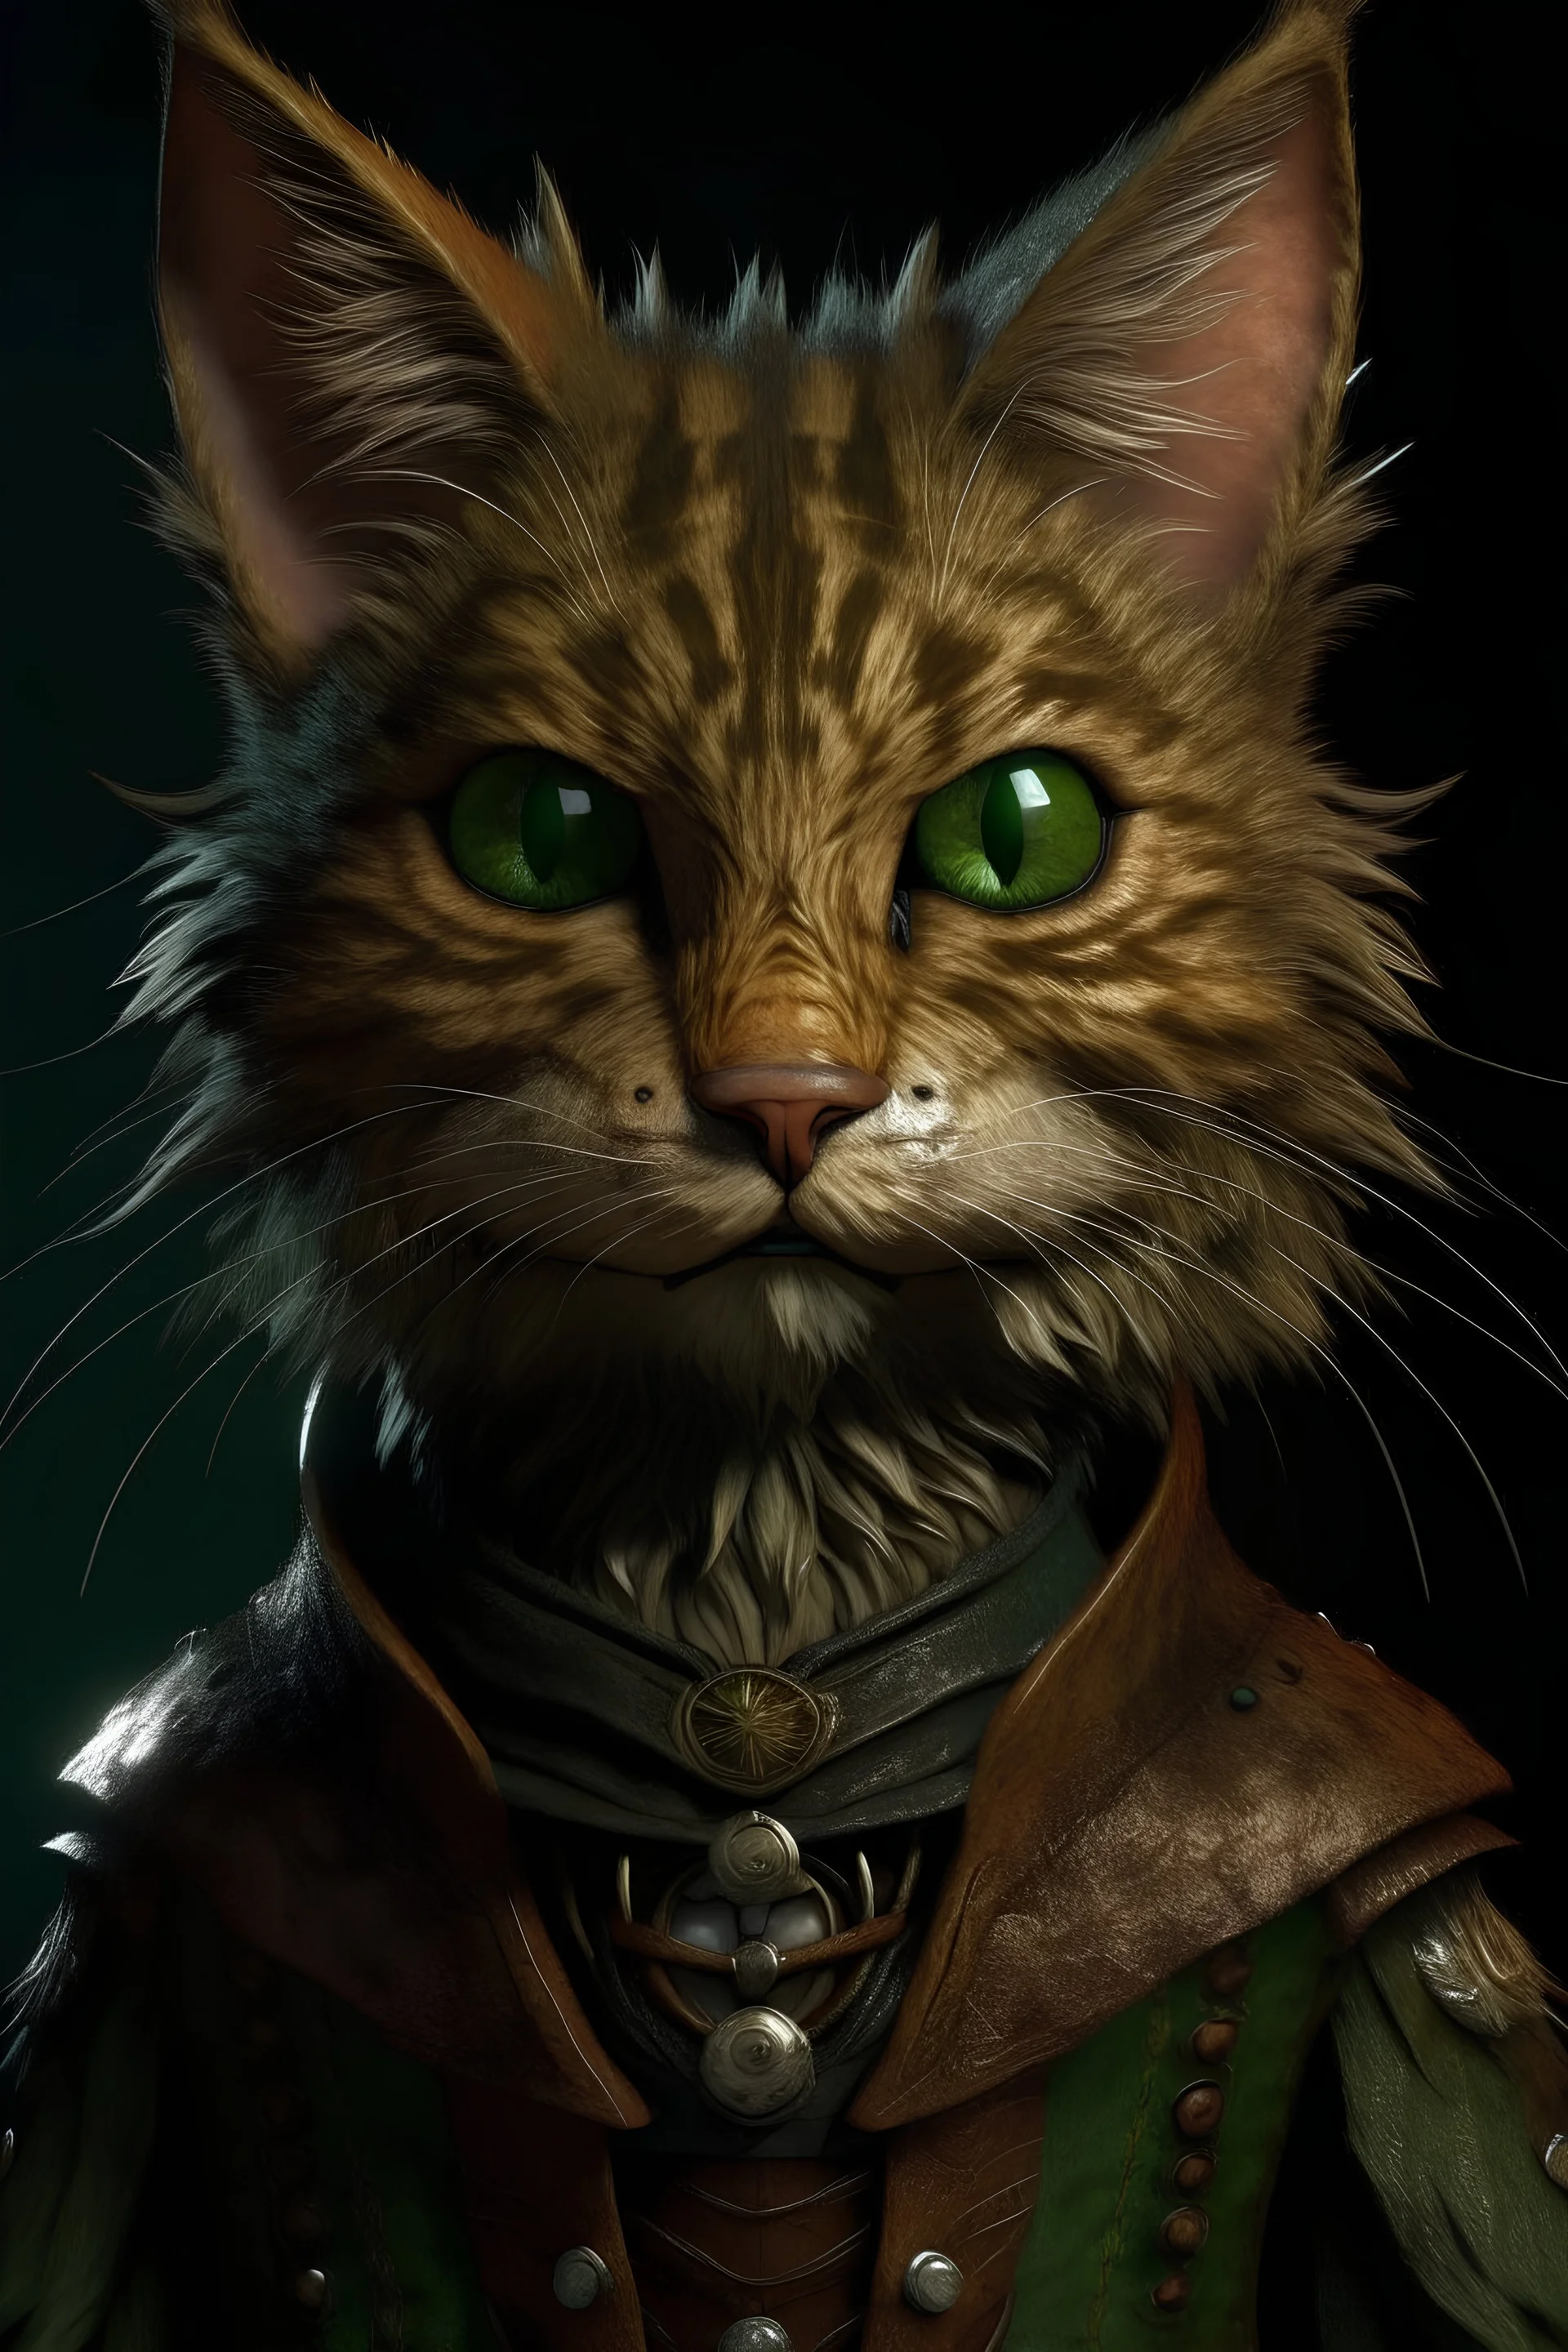 A realistic humanoid cat, with scruffy tabby fur, wearing a leather doublet, green eyes and tattered ears